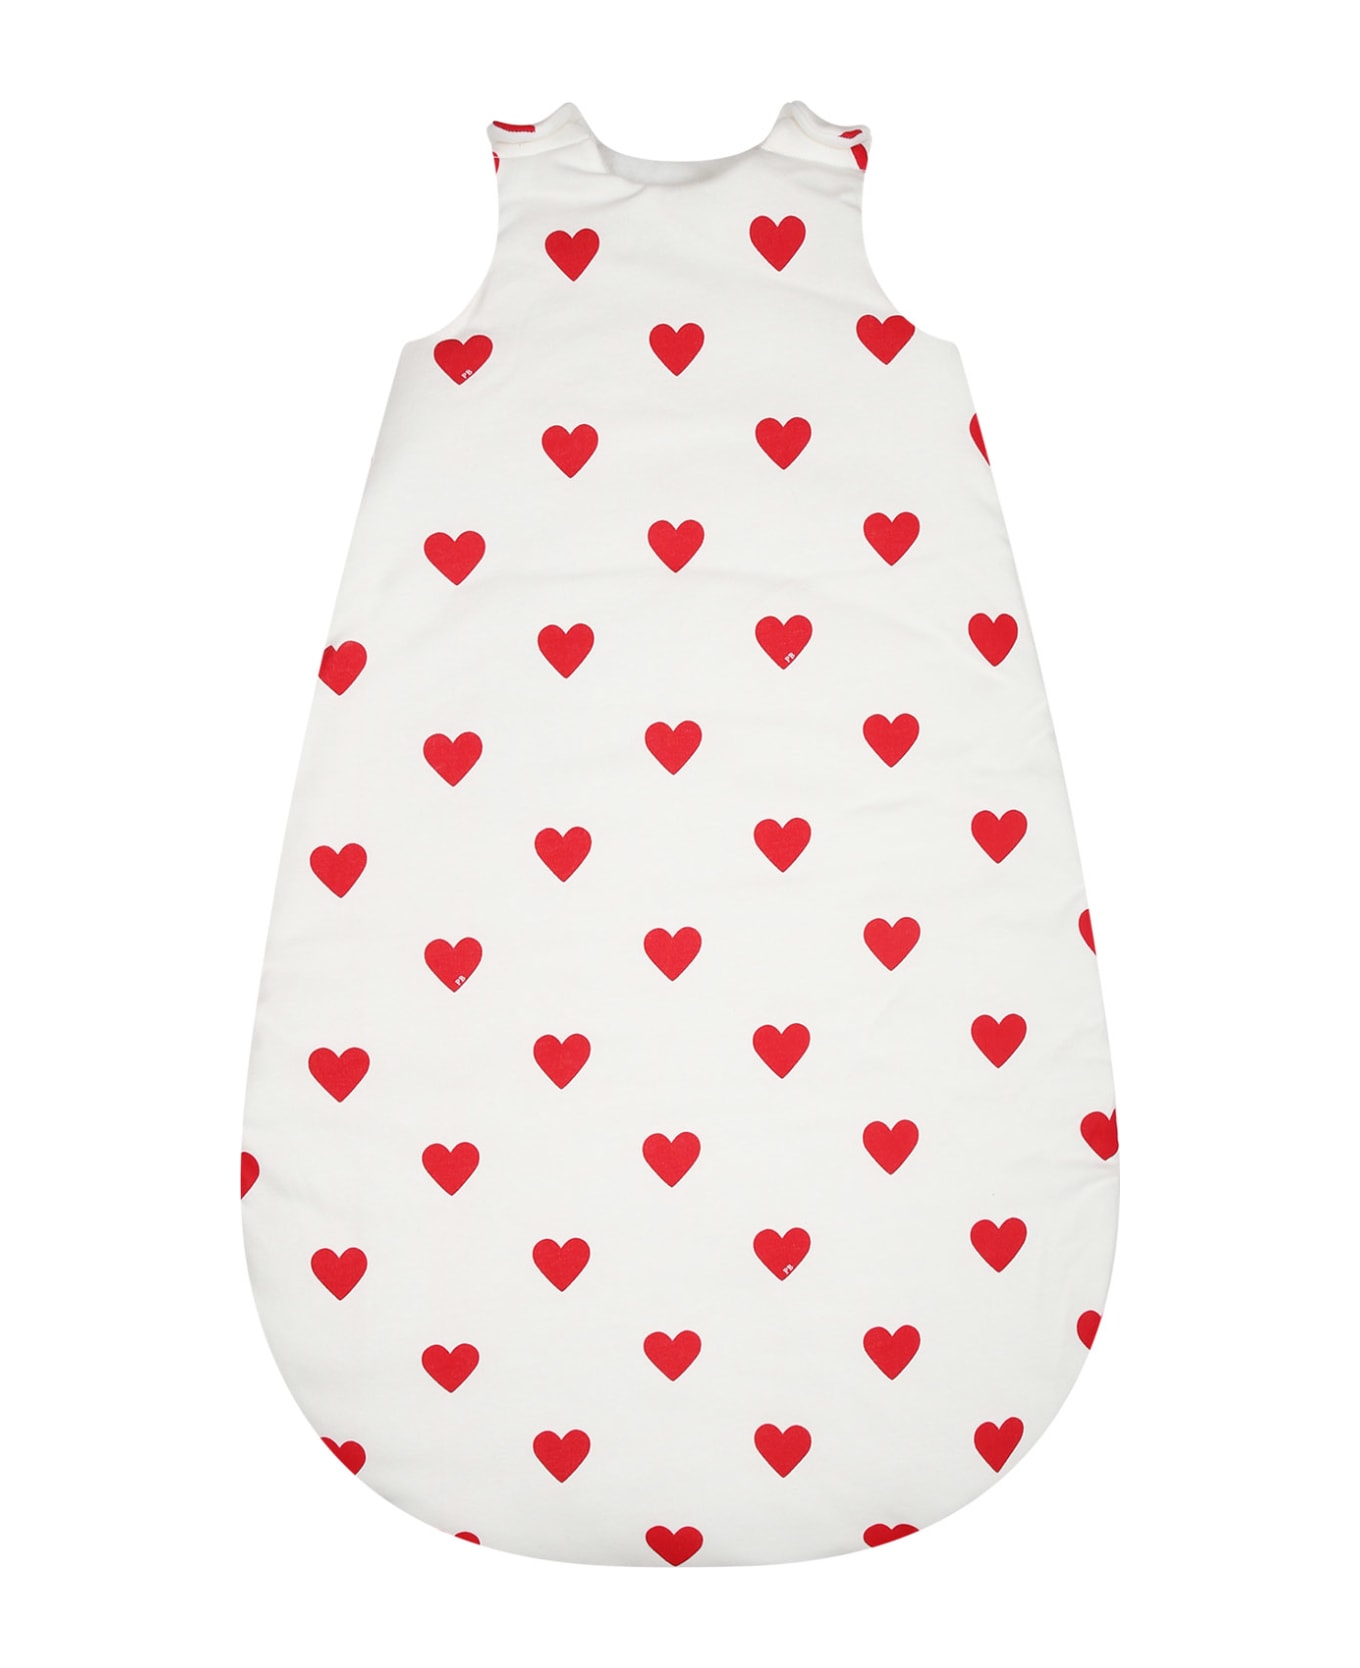 Petit Bateau White Sleeping Bag Kad For Baby Girl With Hearts - White